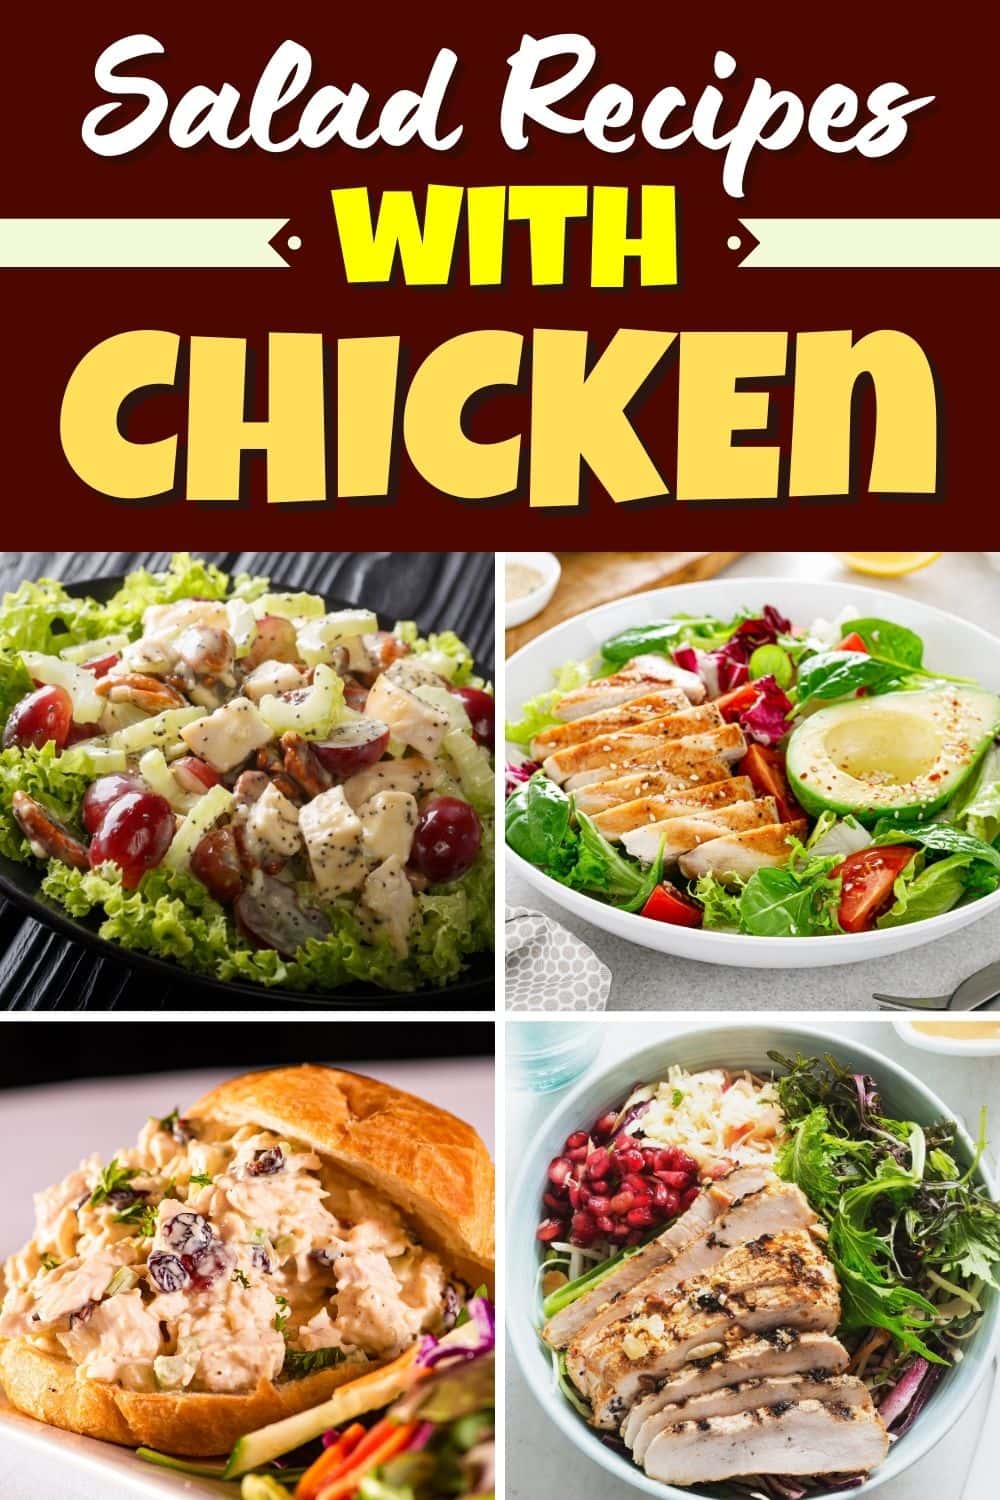 25 Healthy Salad Recipes With Chicken - Insanely Good